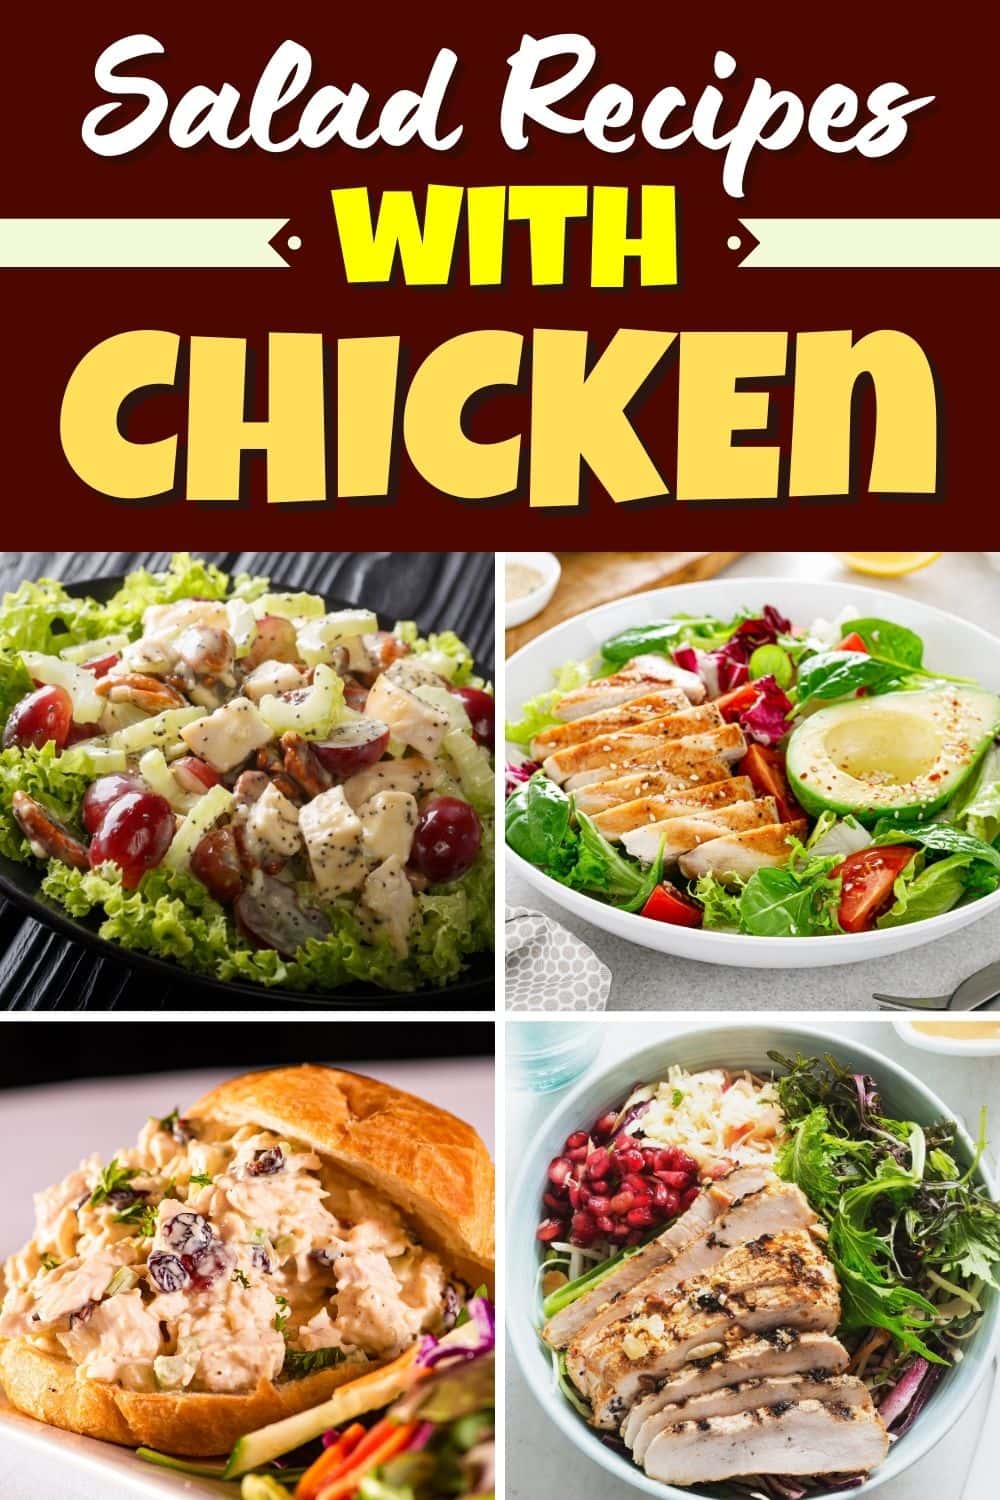 25 Healthy Salad Recipes With Chicken - Insanely Good